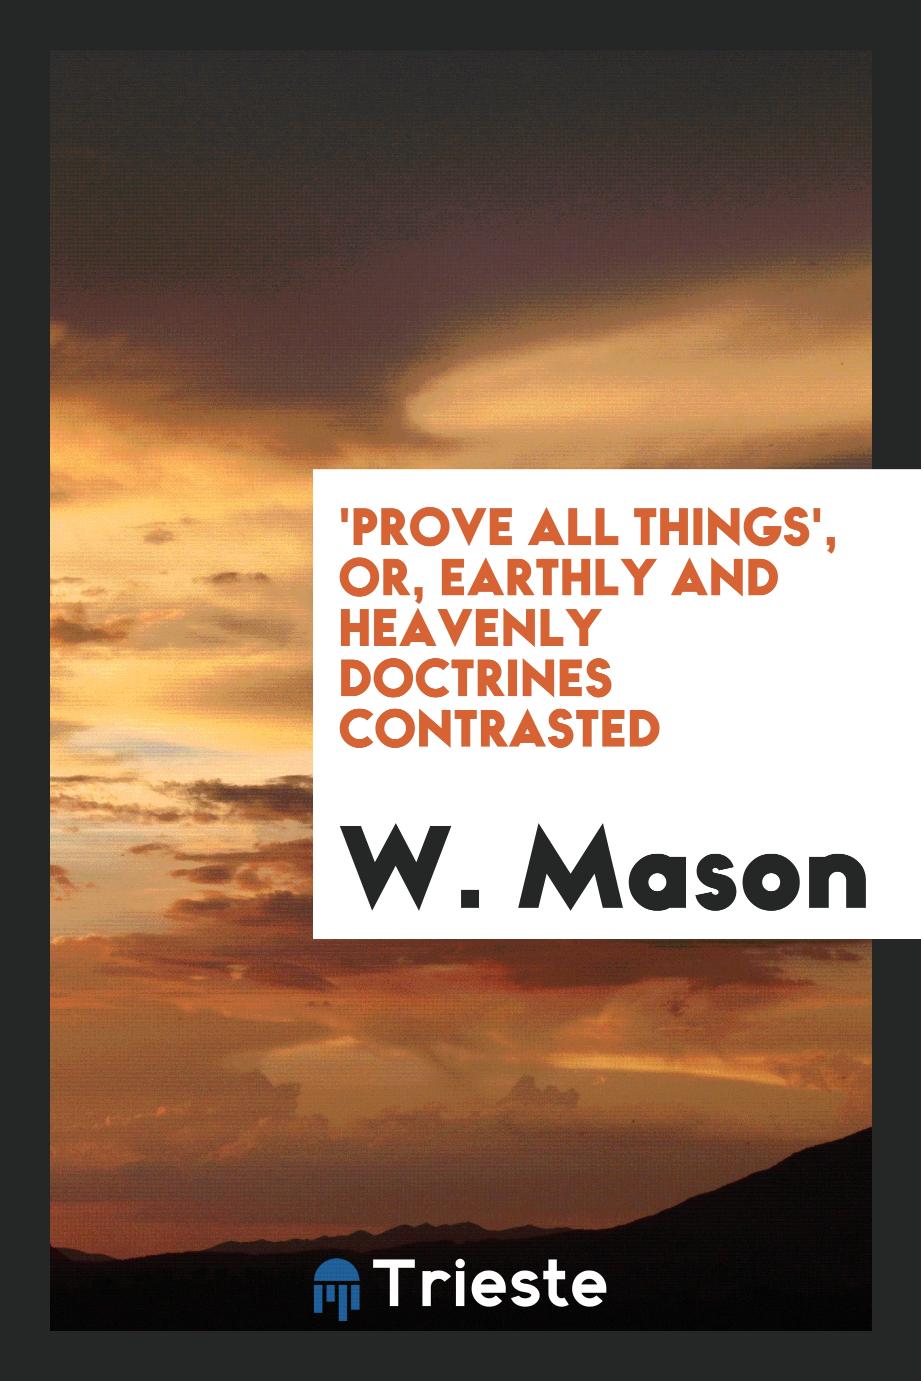 'Prove all things', or, Earthly and heavenly doctrines contrasted